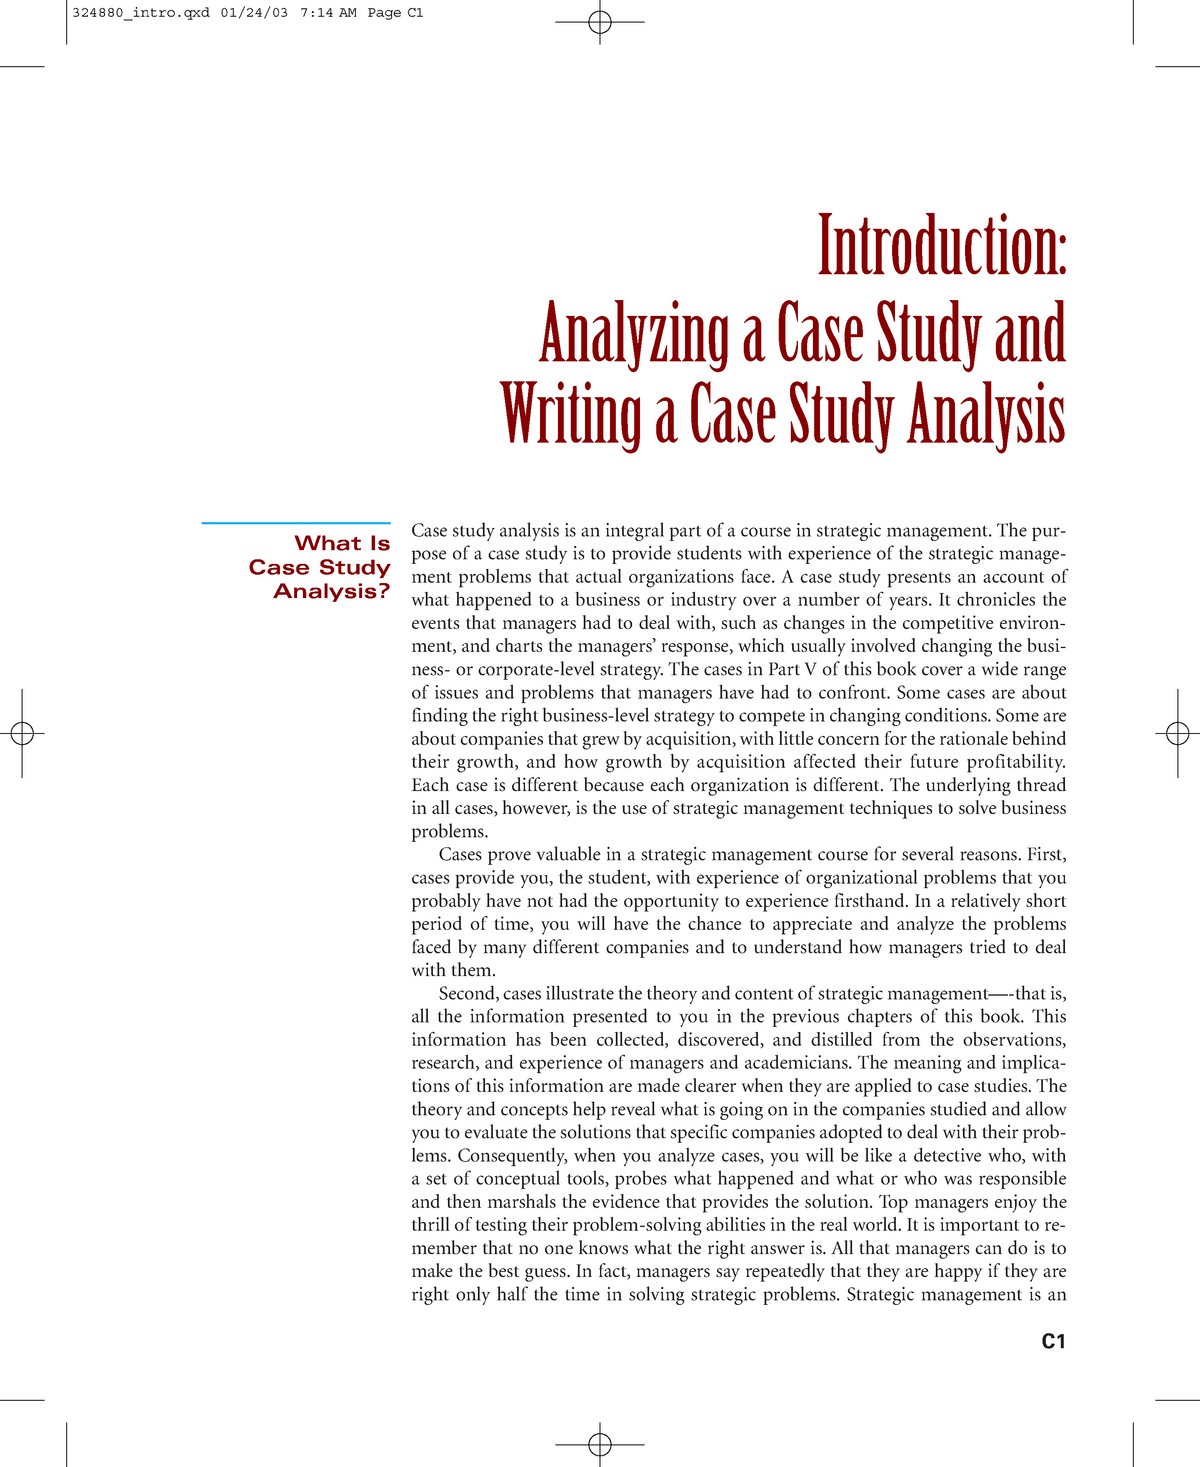 introduction of a case study